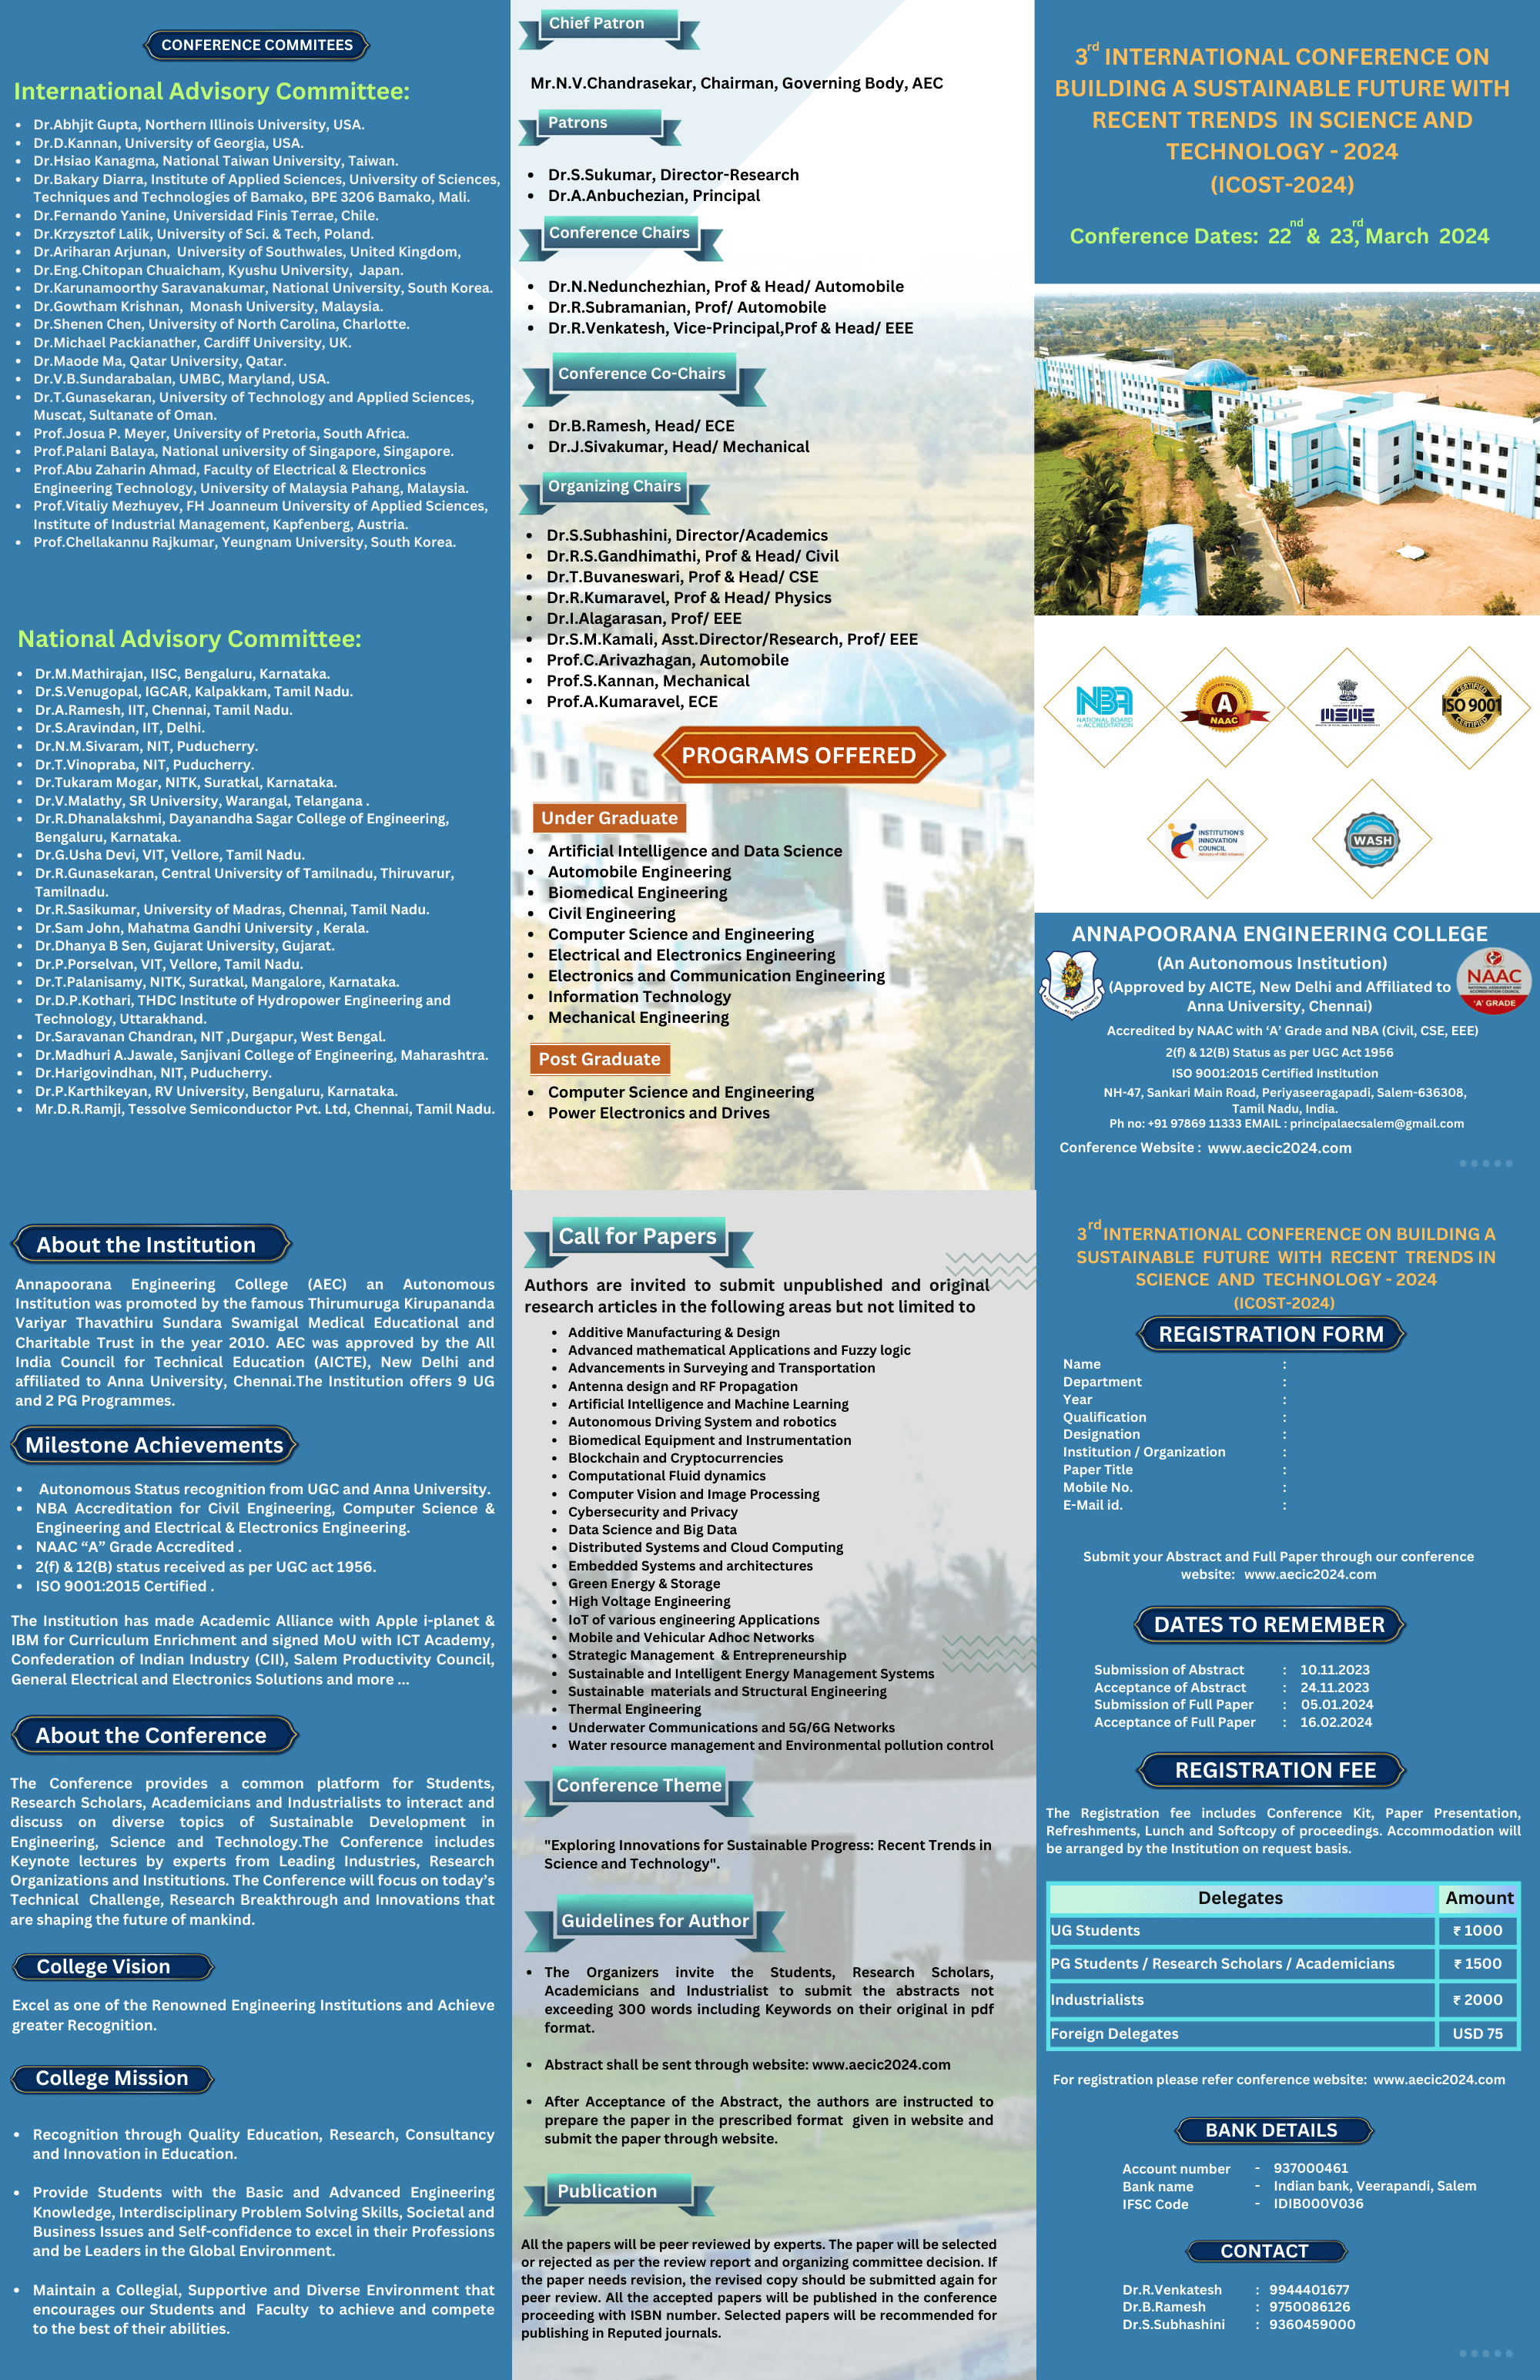 3rd INTERNATIONAL CONFERENCE ON BUILDING A SUSTAINABLE FUTURE WITH RECENT TRENDS IN SCIENCE AND TECHNOLOGY 2024 ( ICOST 2024 ), Salem, Tamil Nadu, India